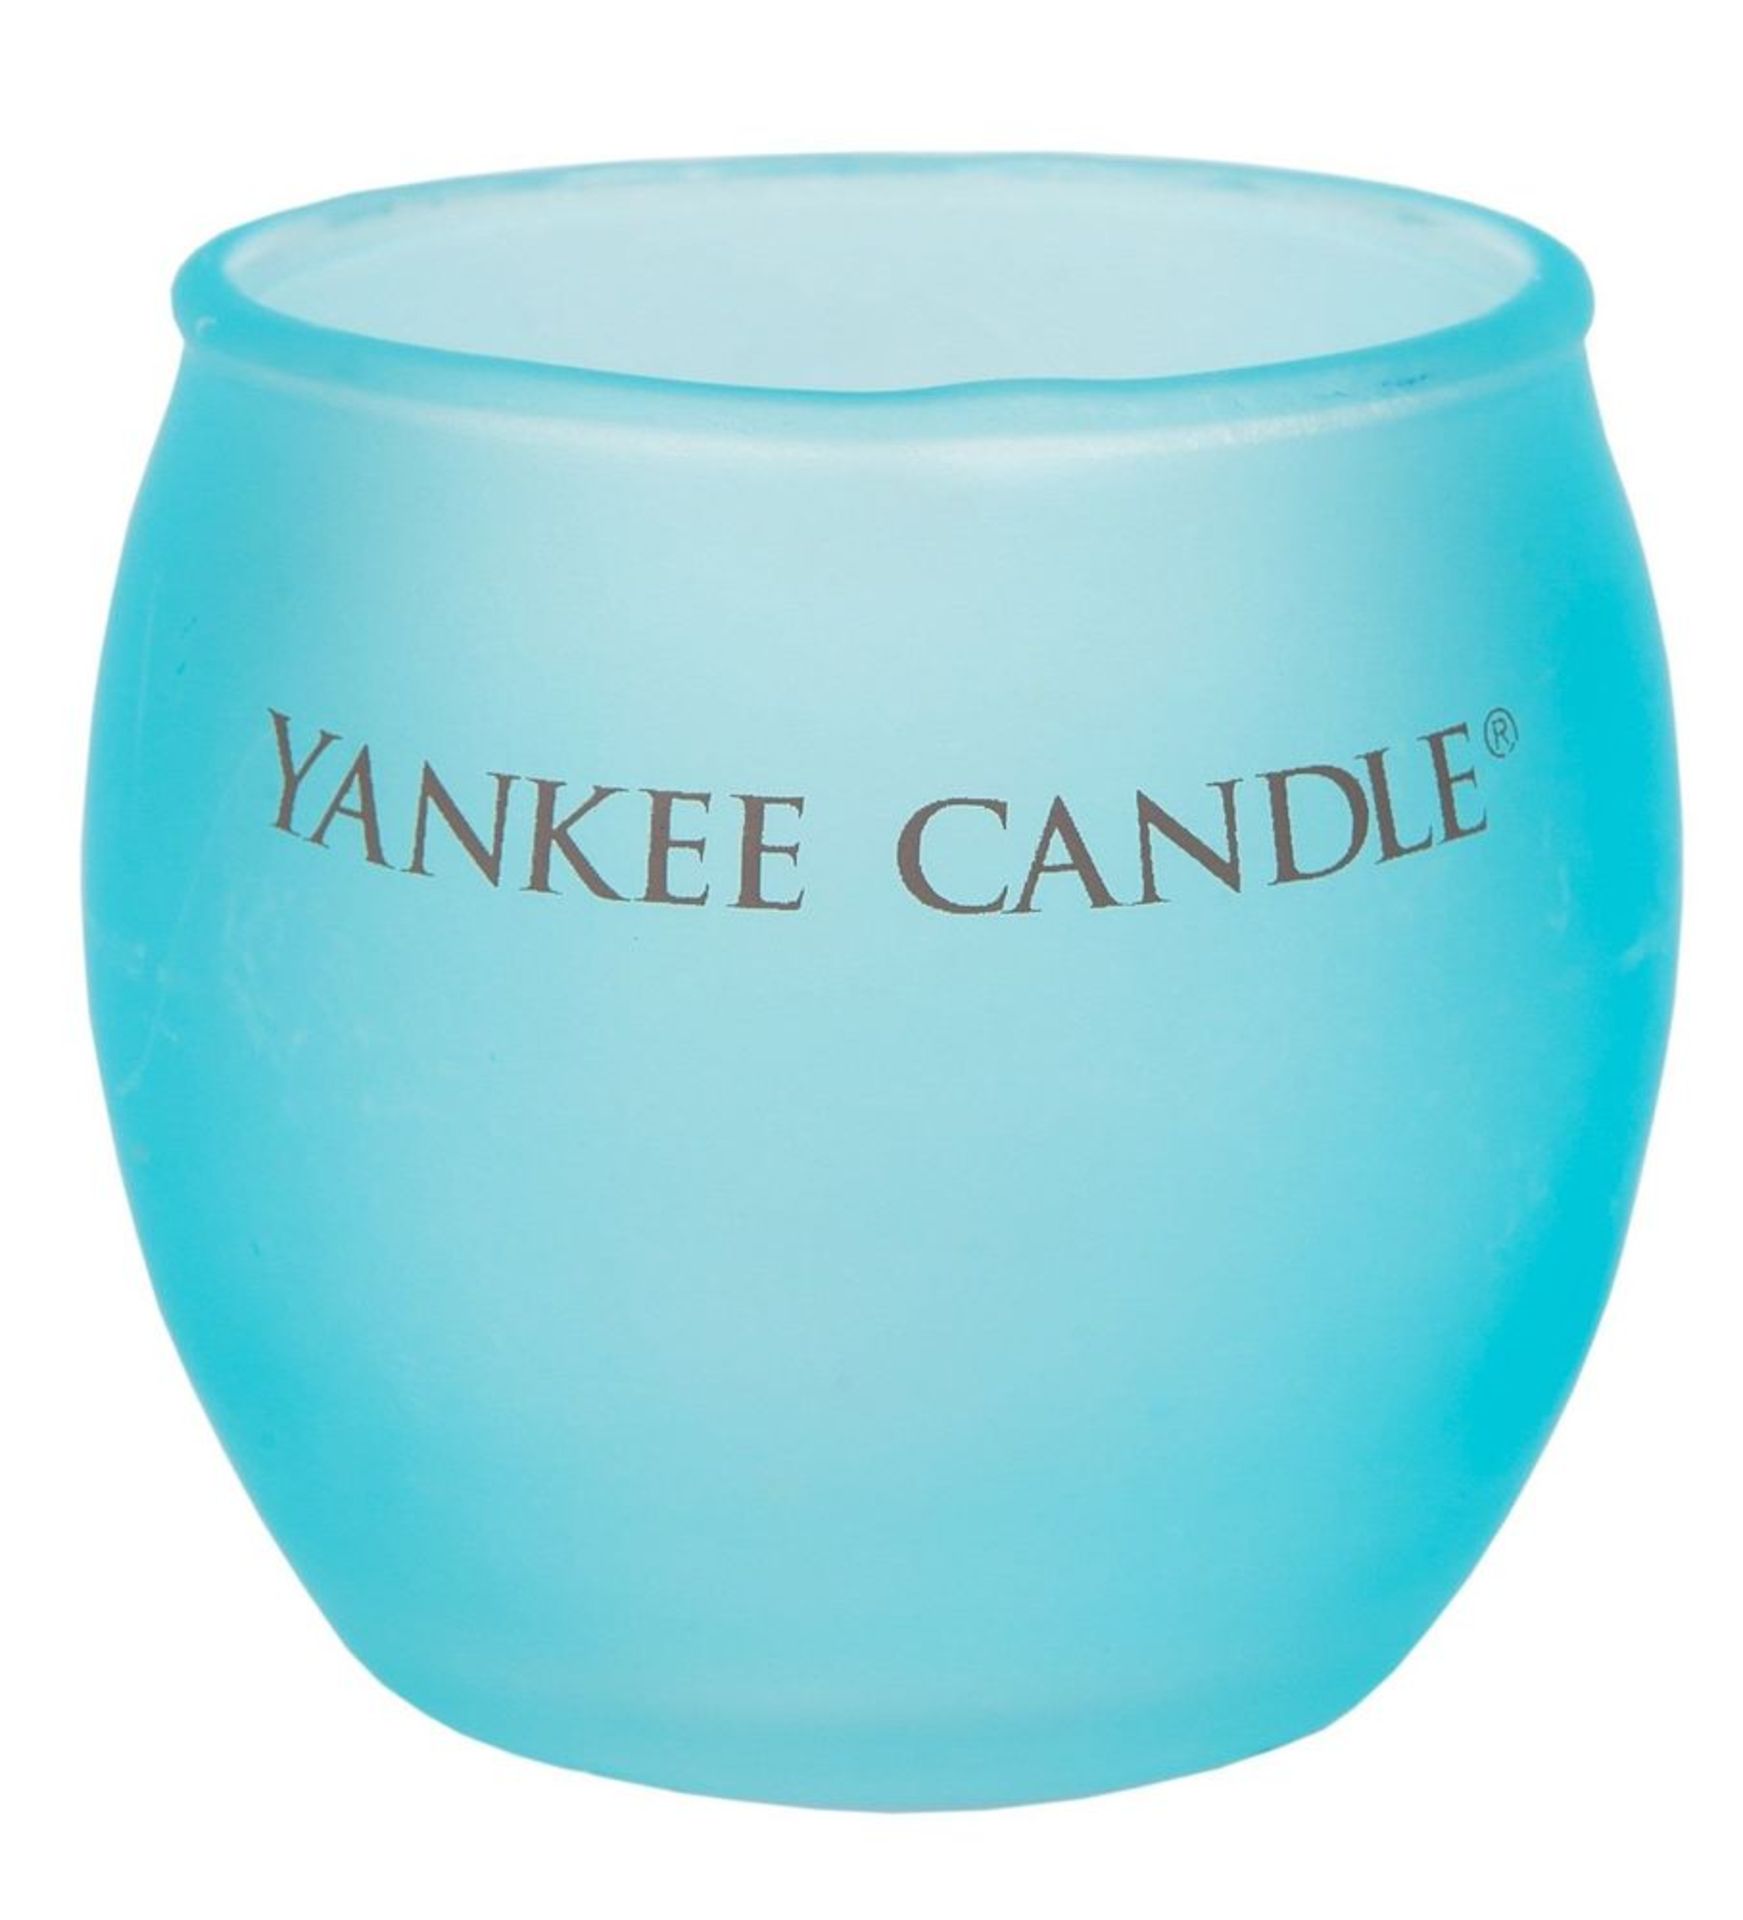 V Brand New Colourful Roly Poly Aqua Votive Yankee Candle Holder X 2 YOUR BID PRICE TO BE MULTIPLIED